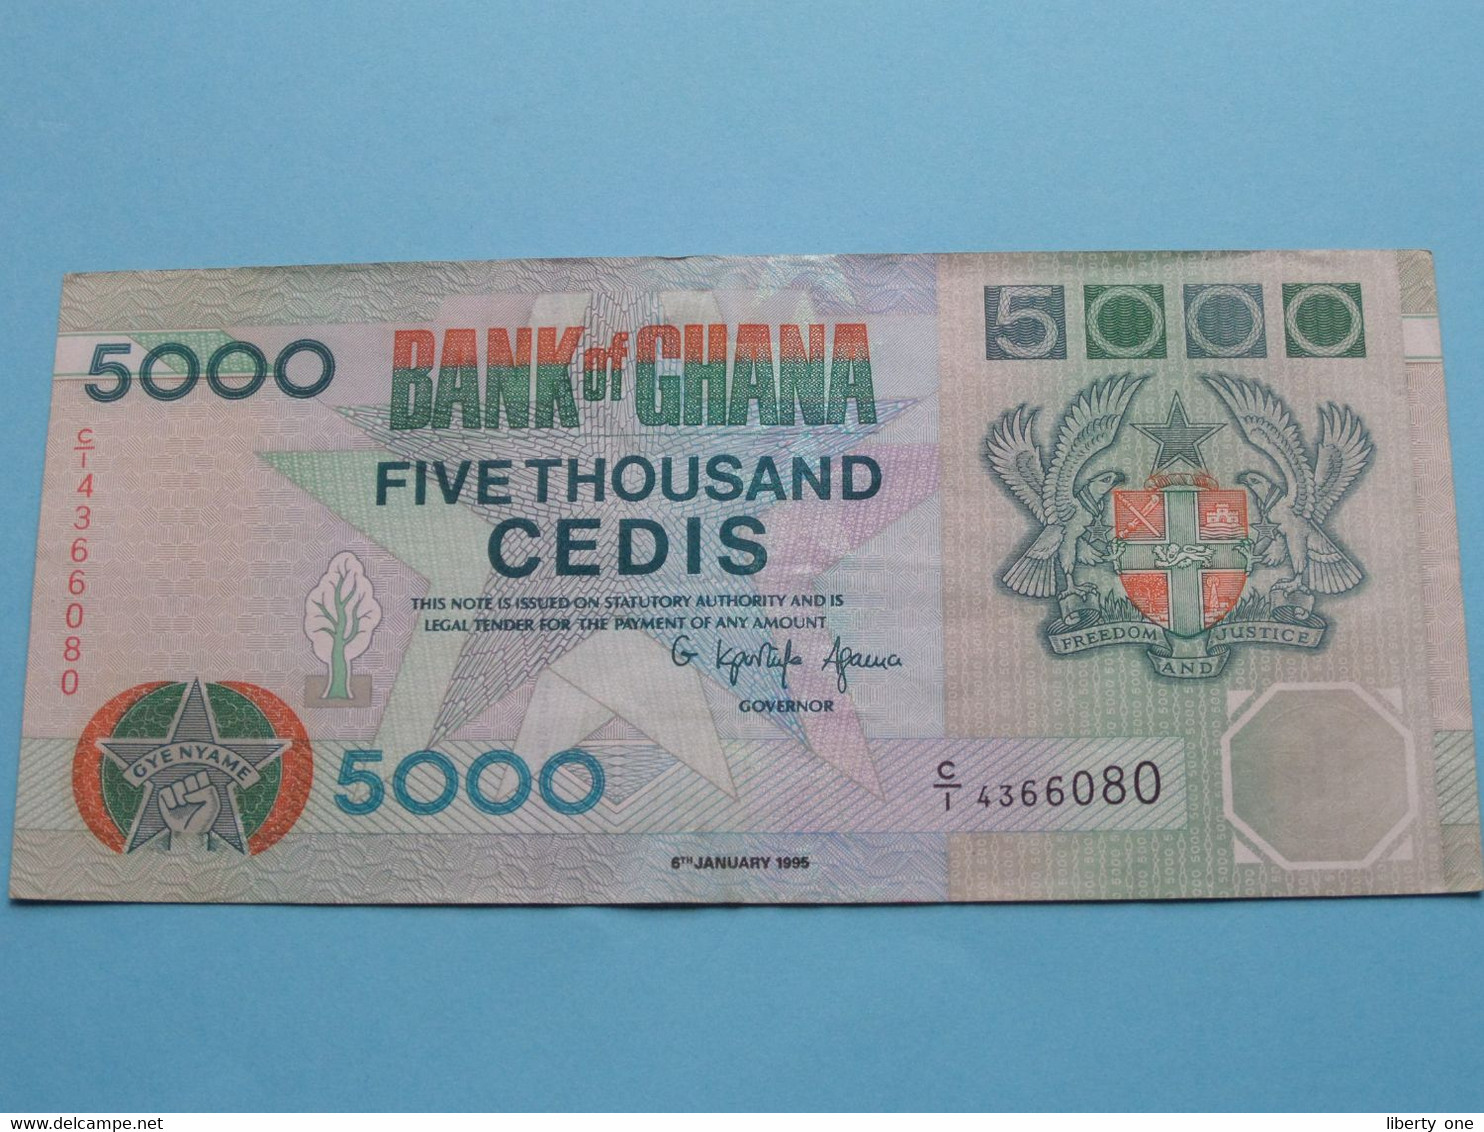 5000 Five Thousand CEDIS - 6 Jan 1995 - C/I 4366080 ( For Grade See SCANS ) Circulated ! - Ghana